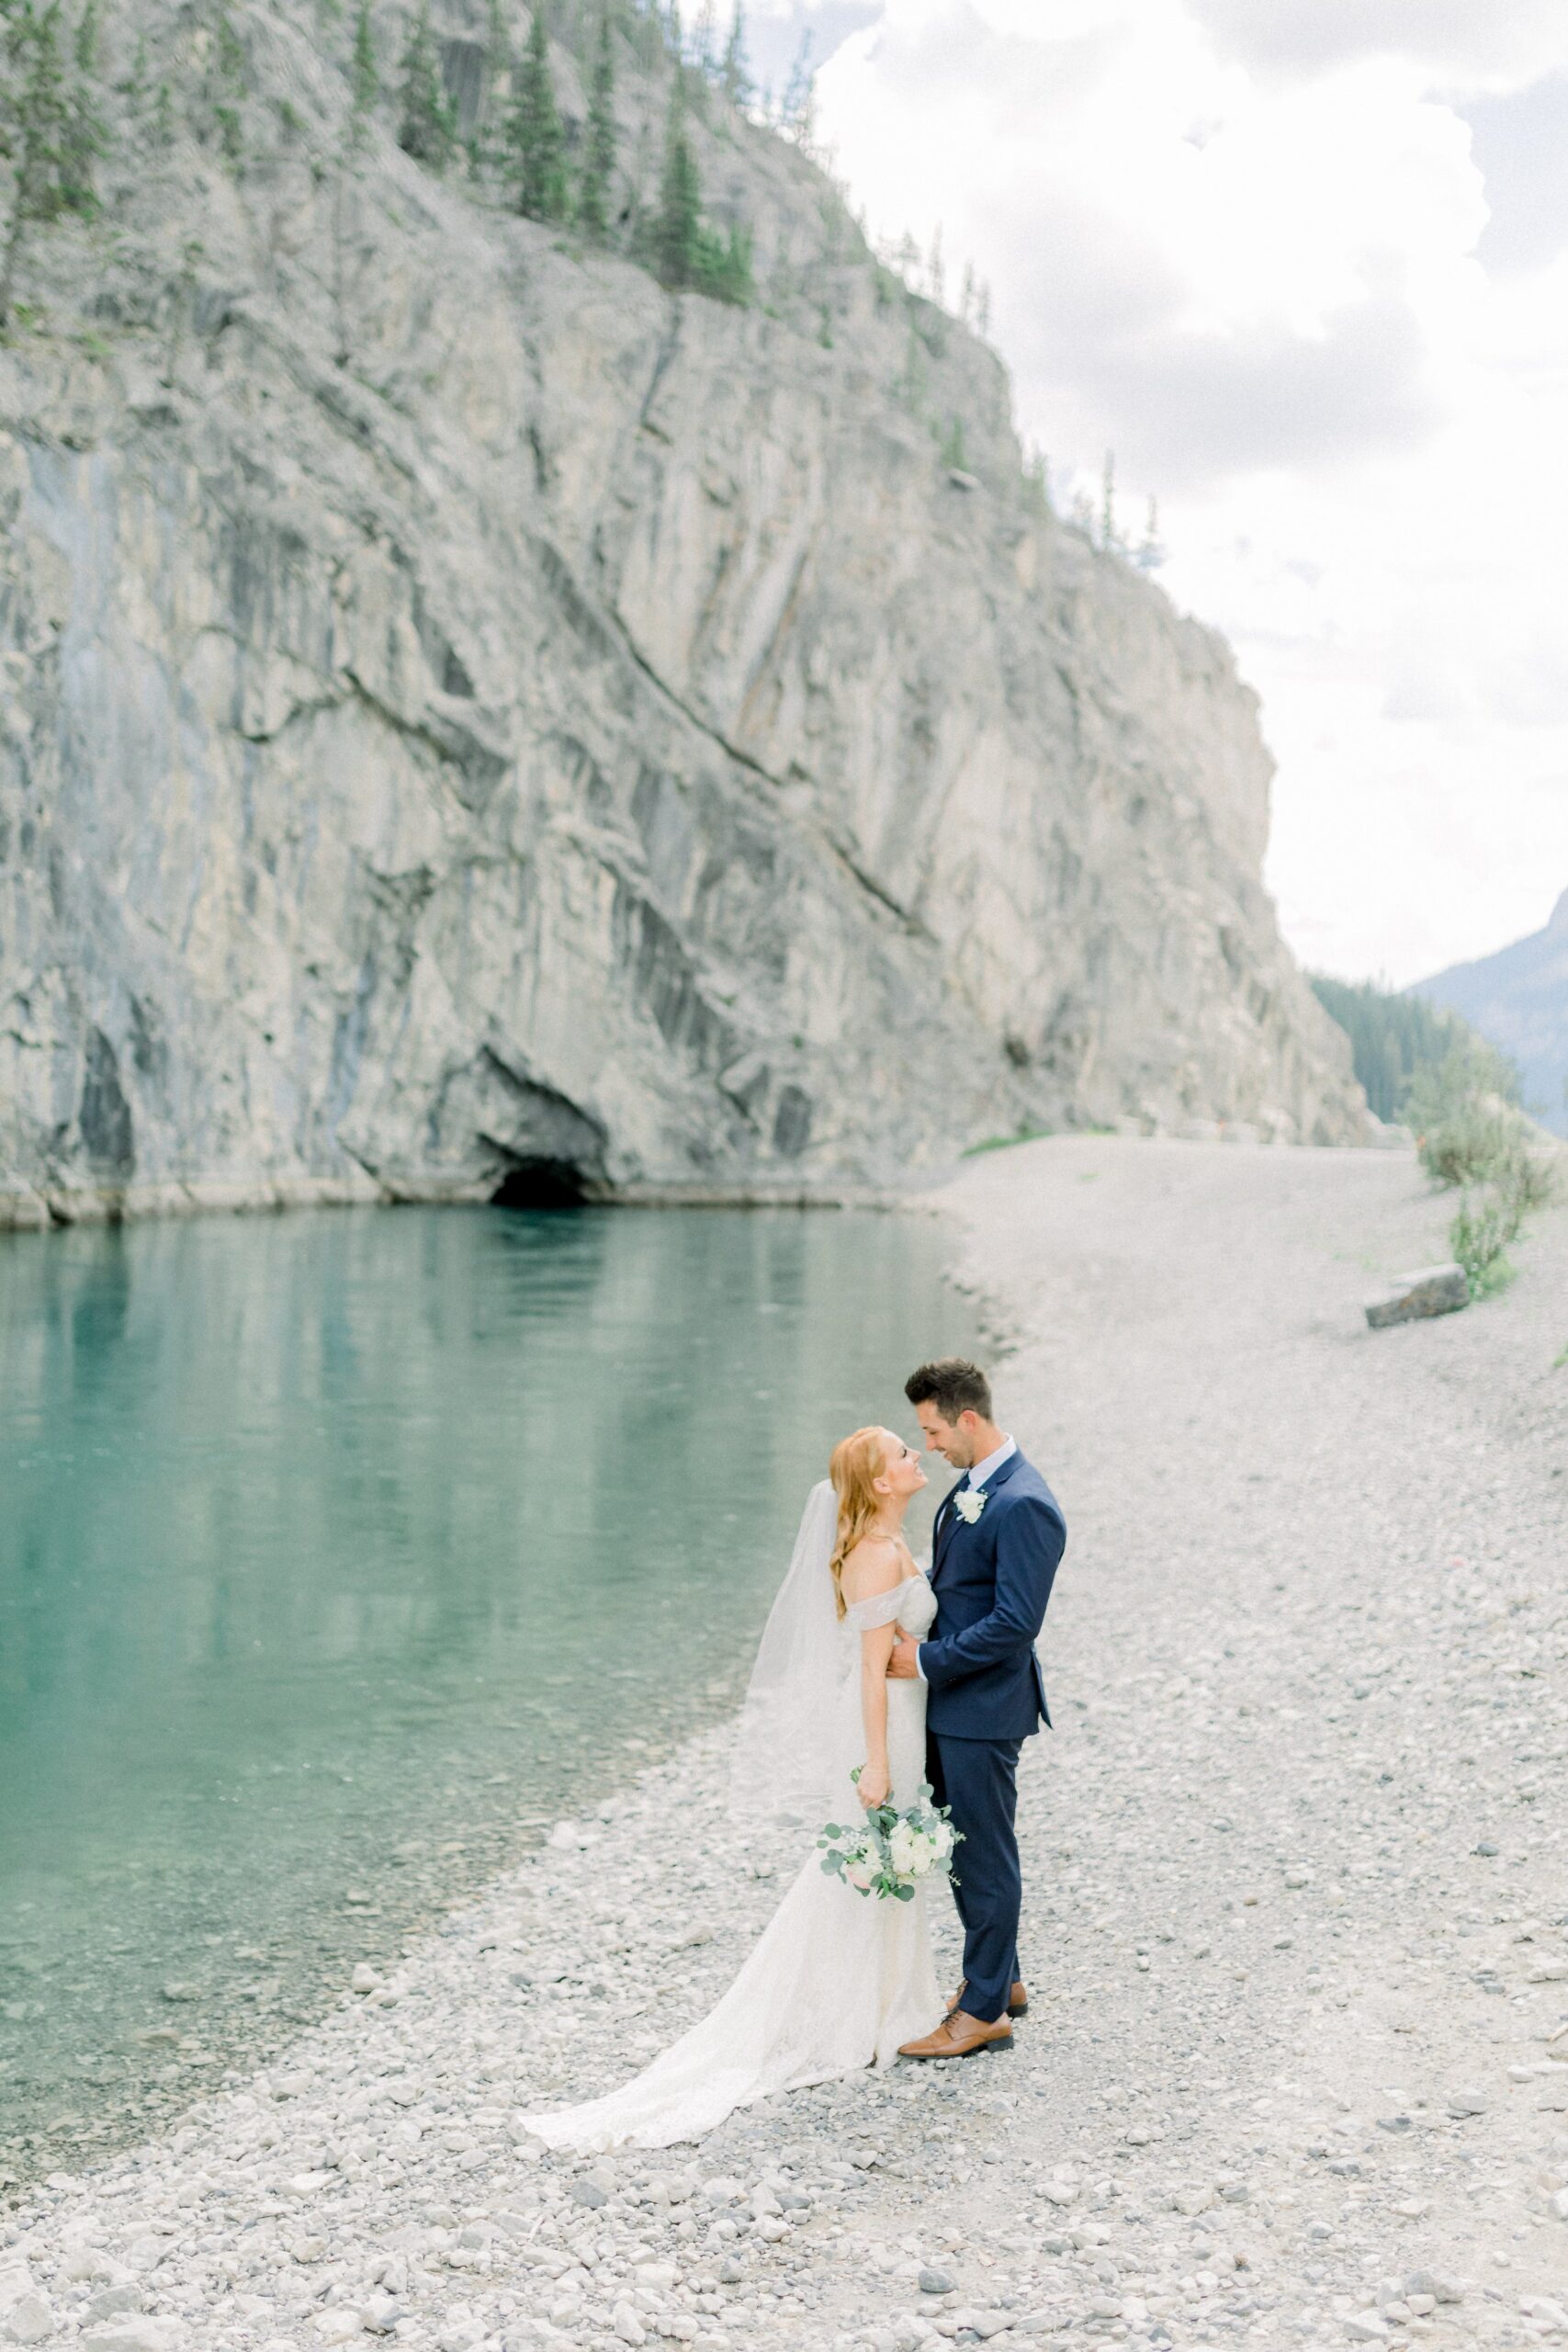 Shaylee + Brandon // A Summer Destination Wedding at The Canmore Nordic Centre